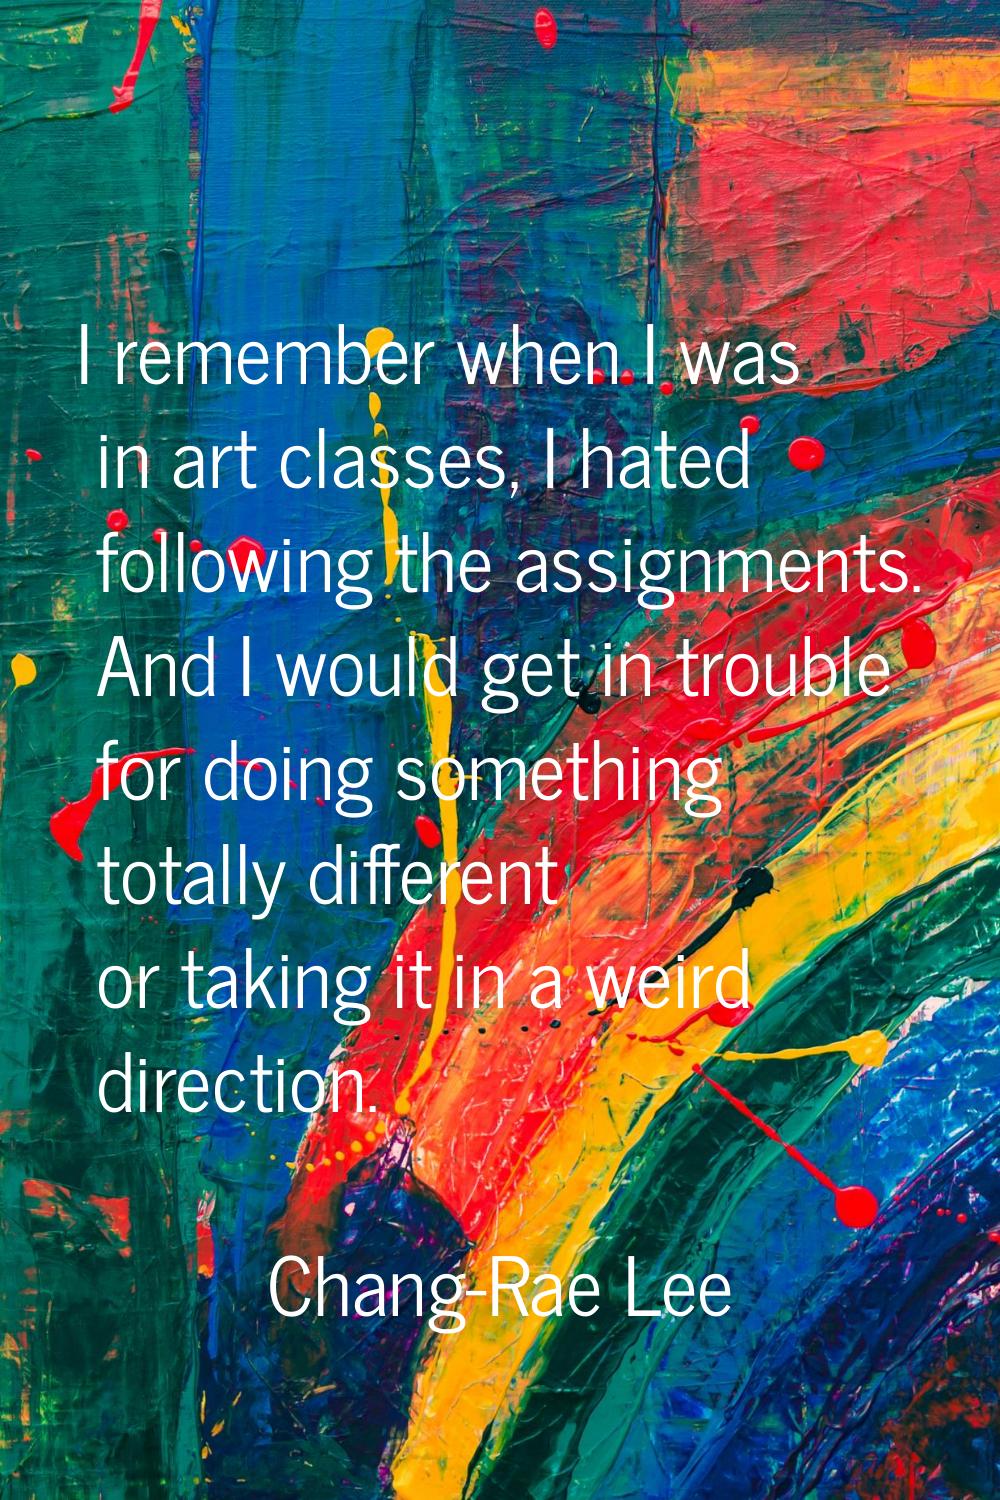 I remember when I was in art classes, I hated following the assignments. And I would get in trouble